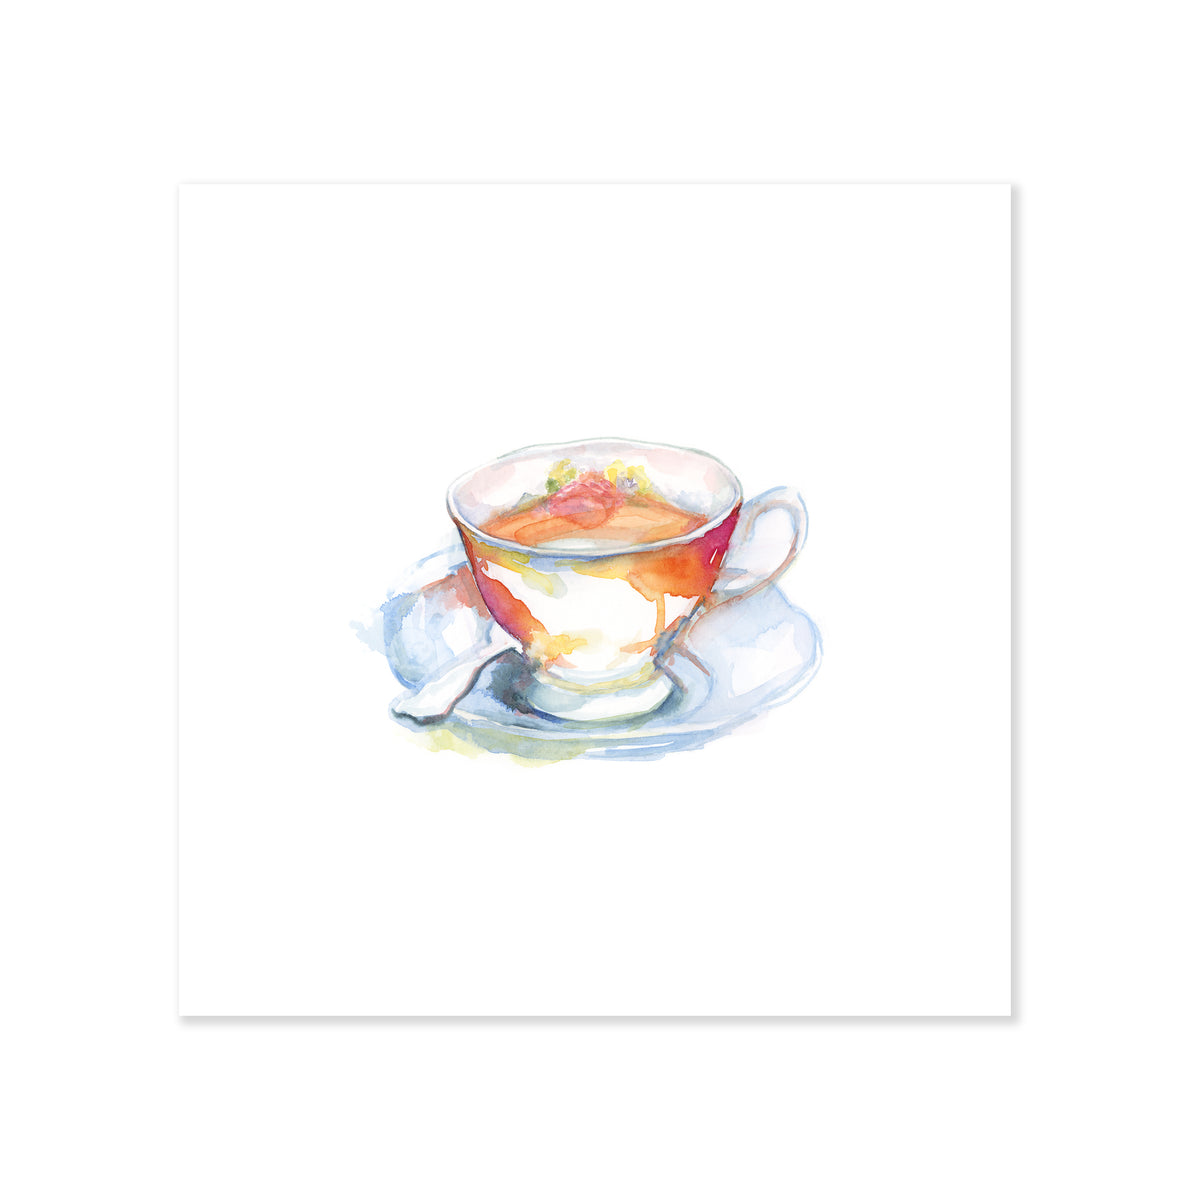 A fine art print illustrating a cup of tea on a saucer plate with a spoon painted with watercolors on a soft white background